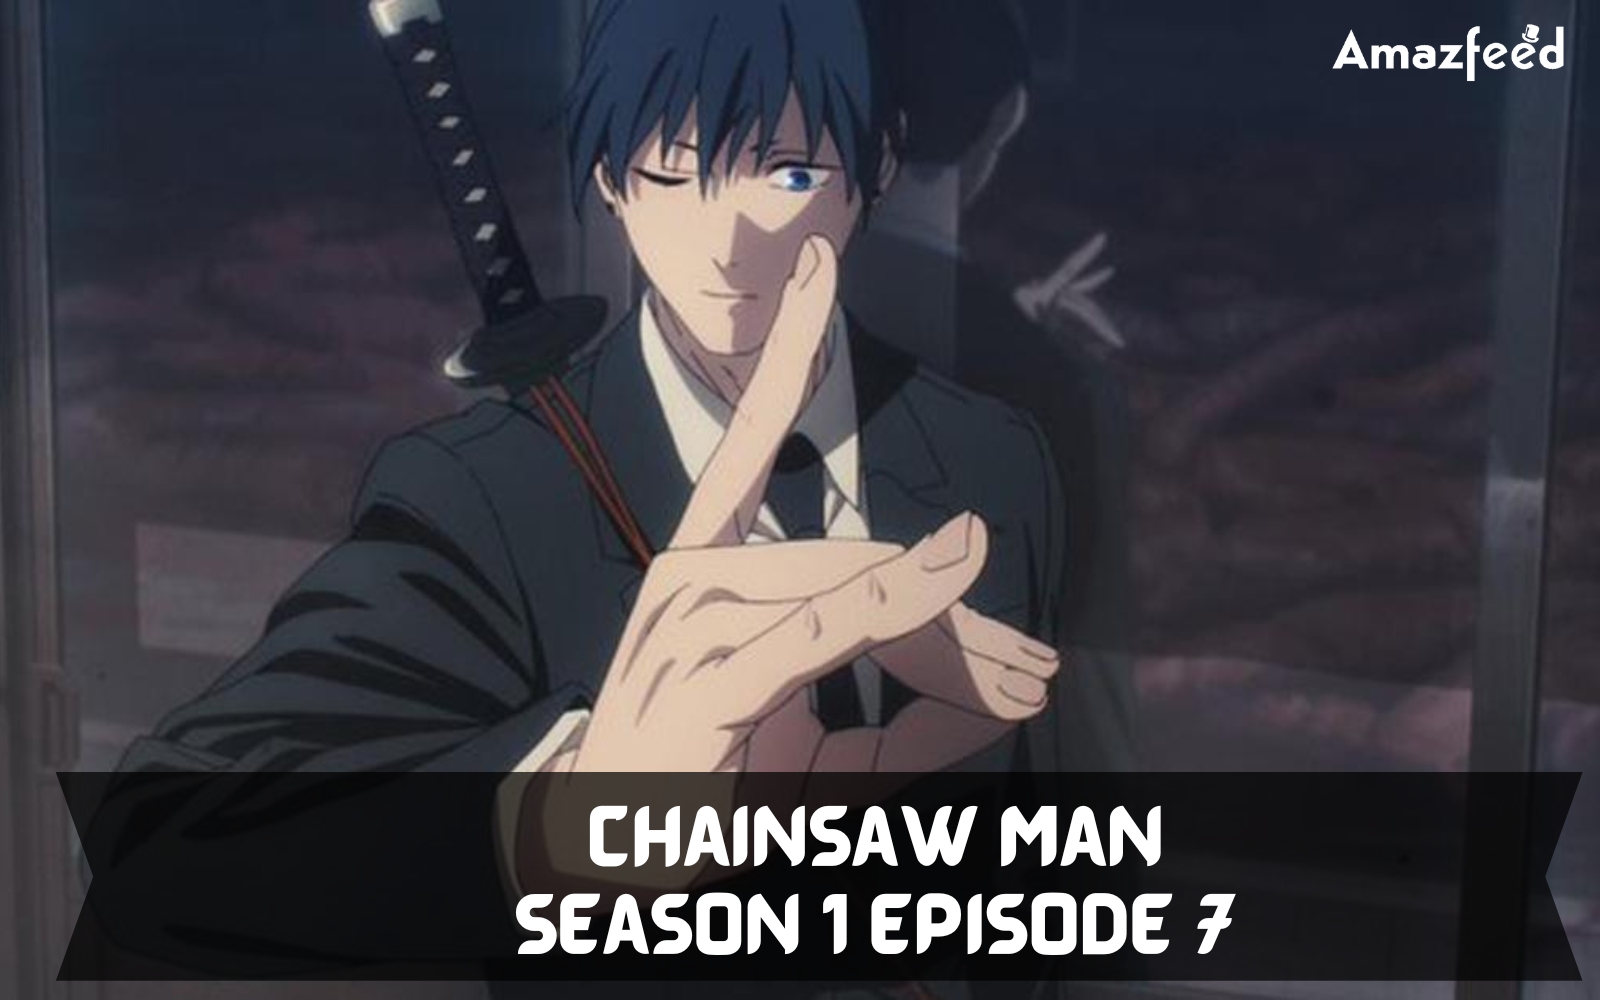 Chainsaw Man season 1, episode 7 release date, time and where to watch